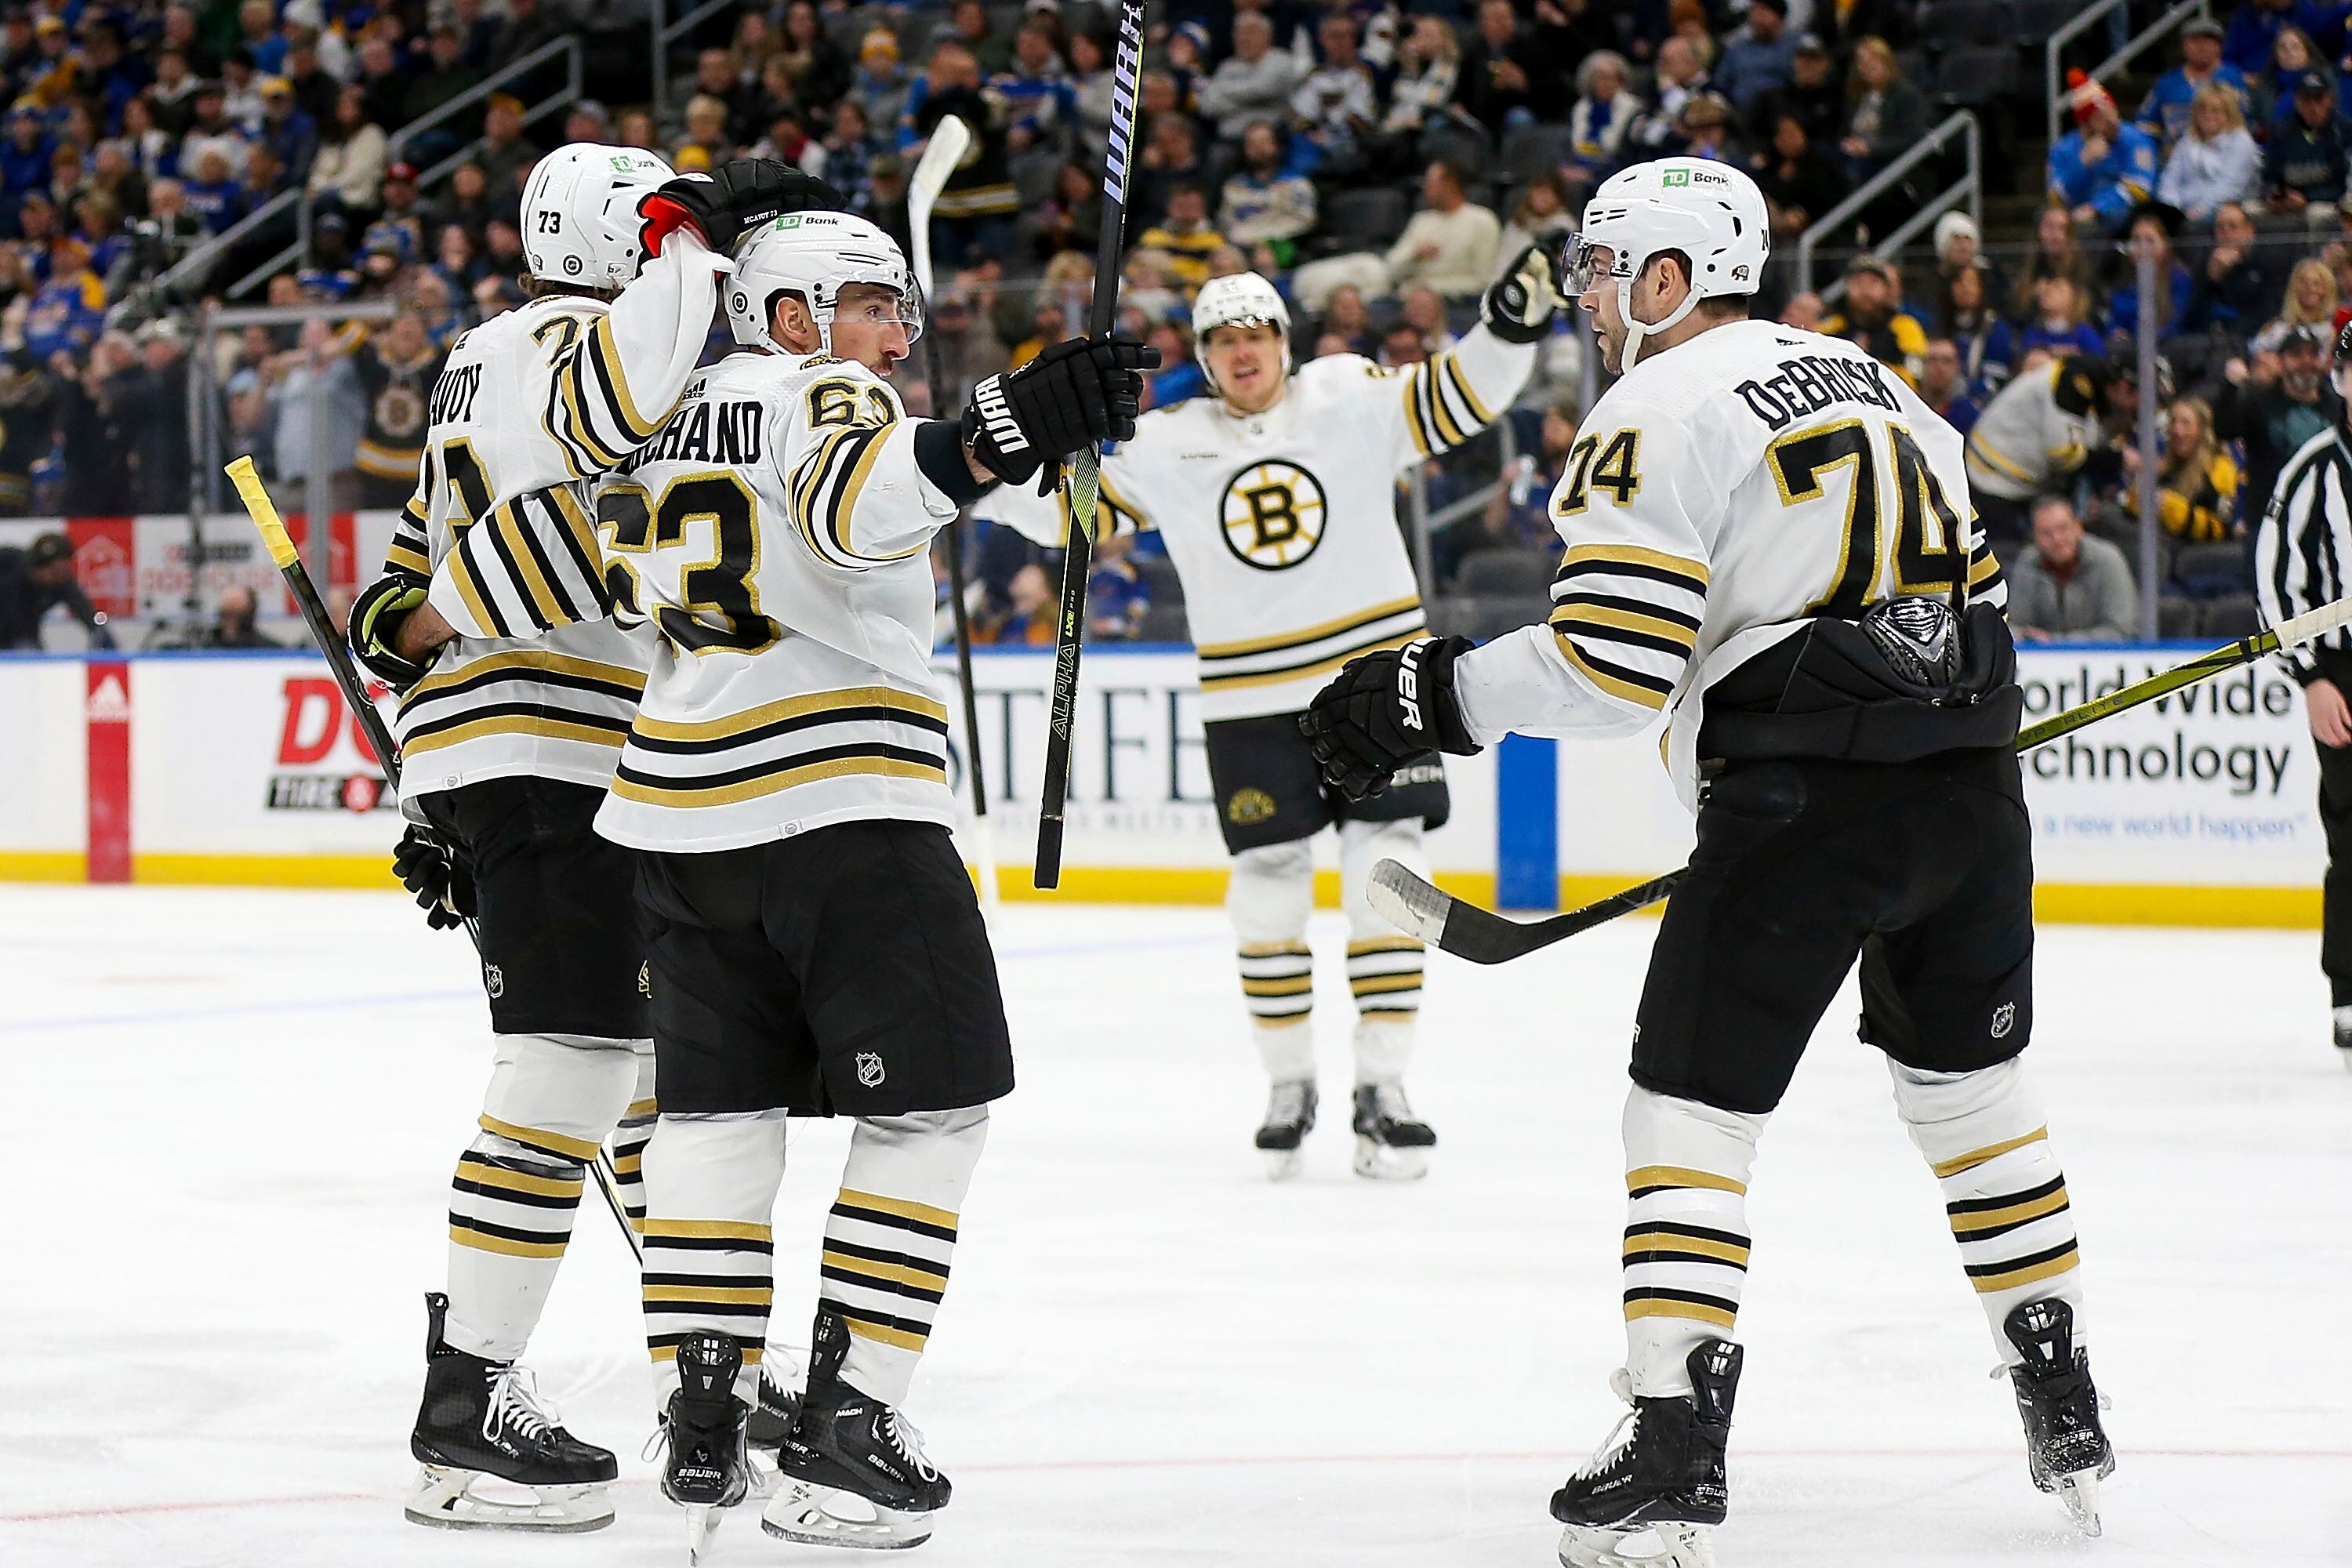 charlie mcavoy’s second goal ends bruins road trip on a high note, with an ot win over the blues